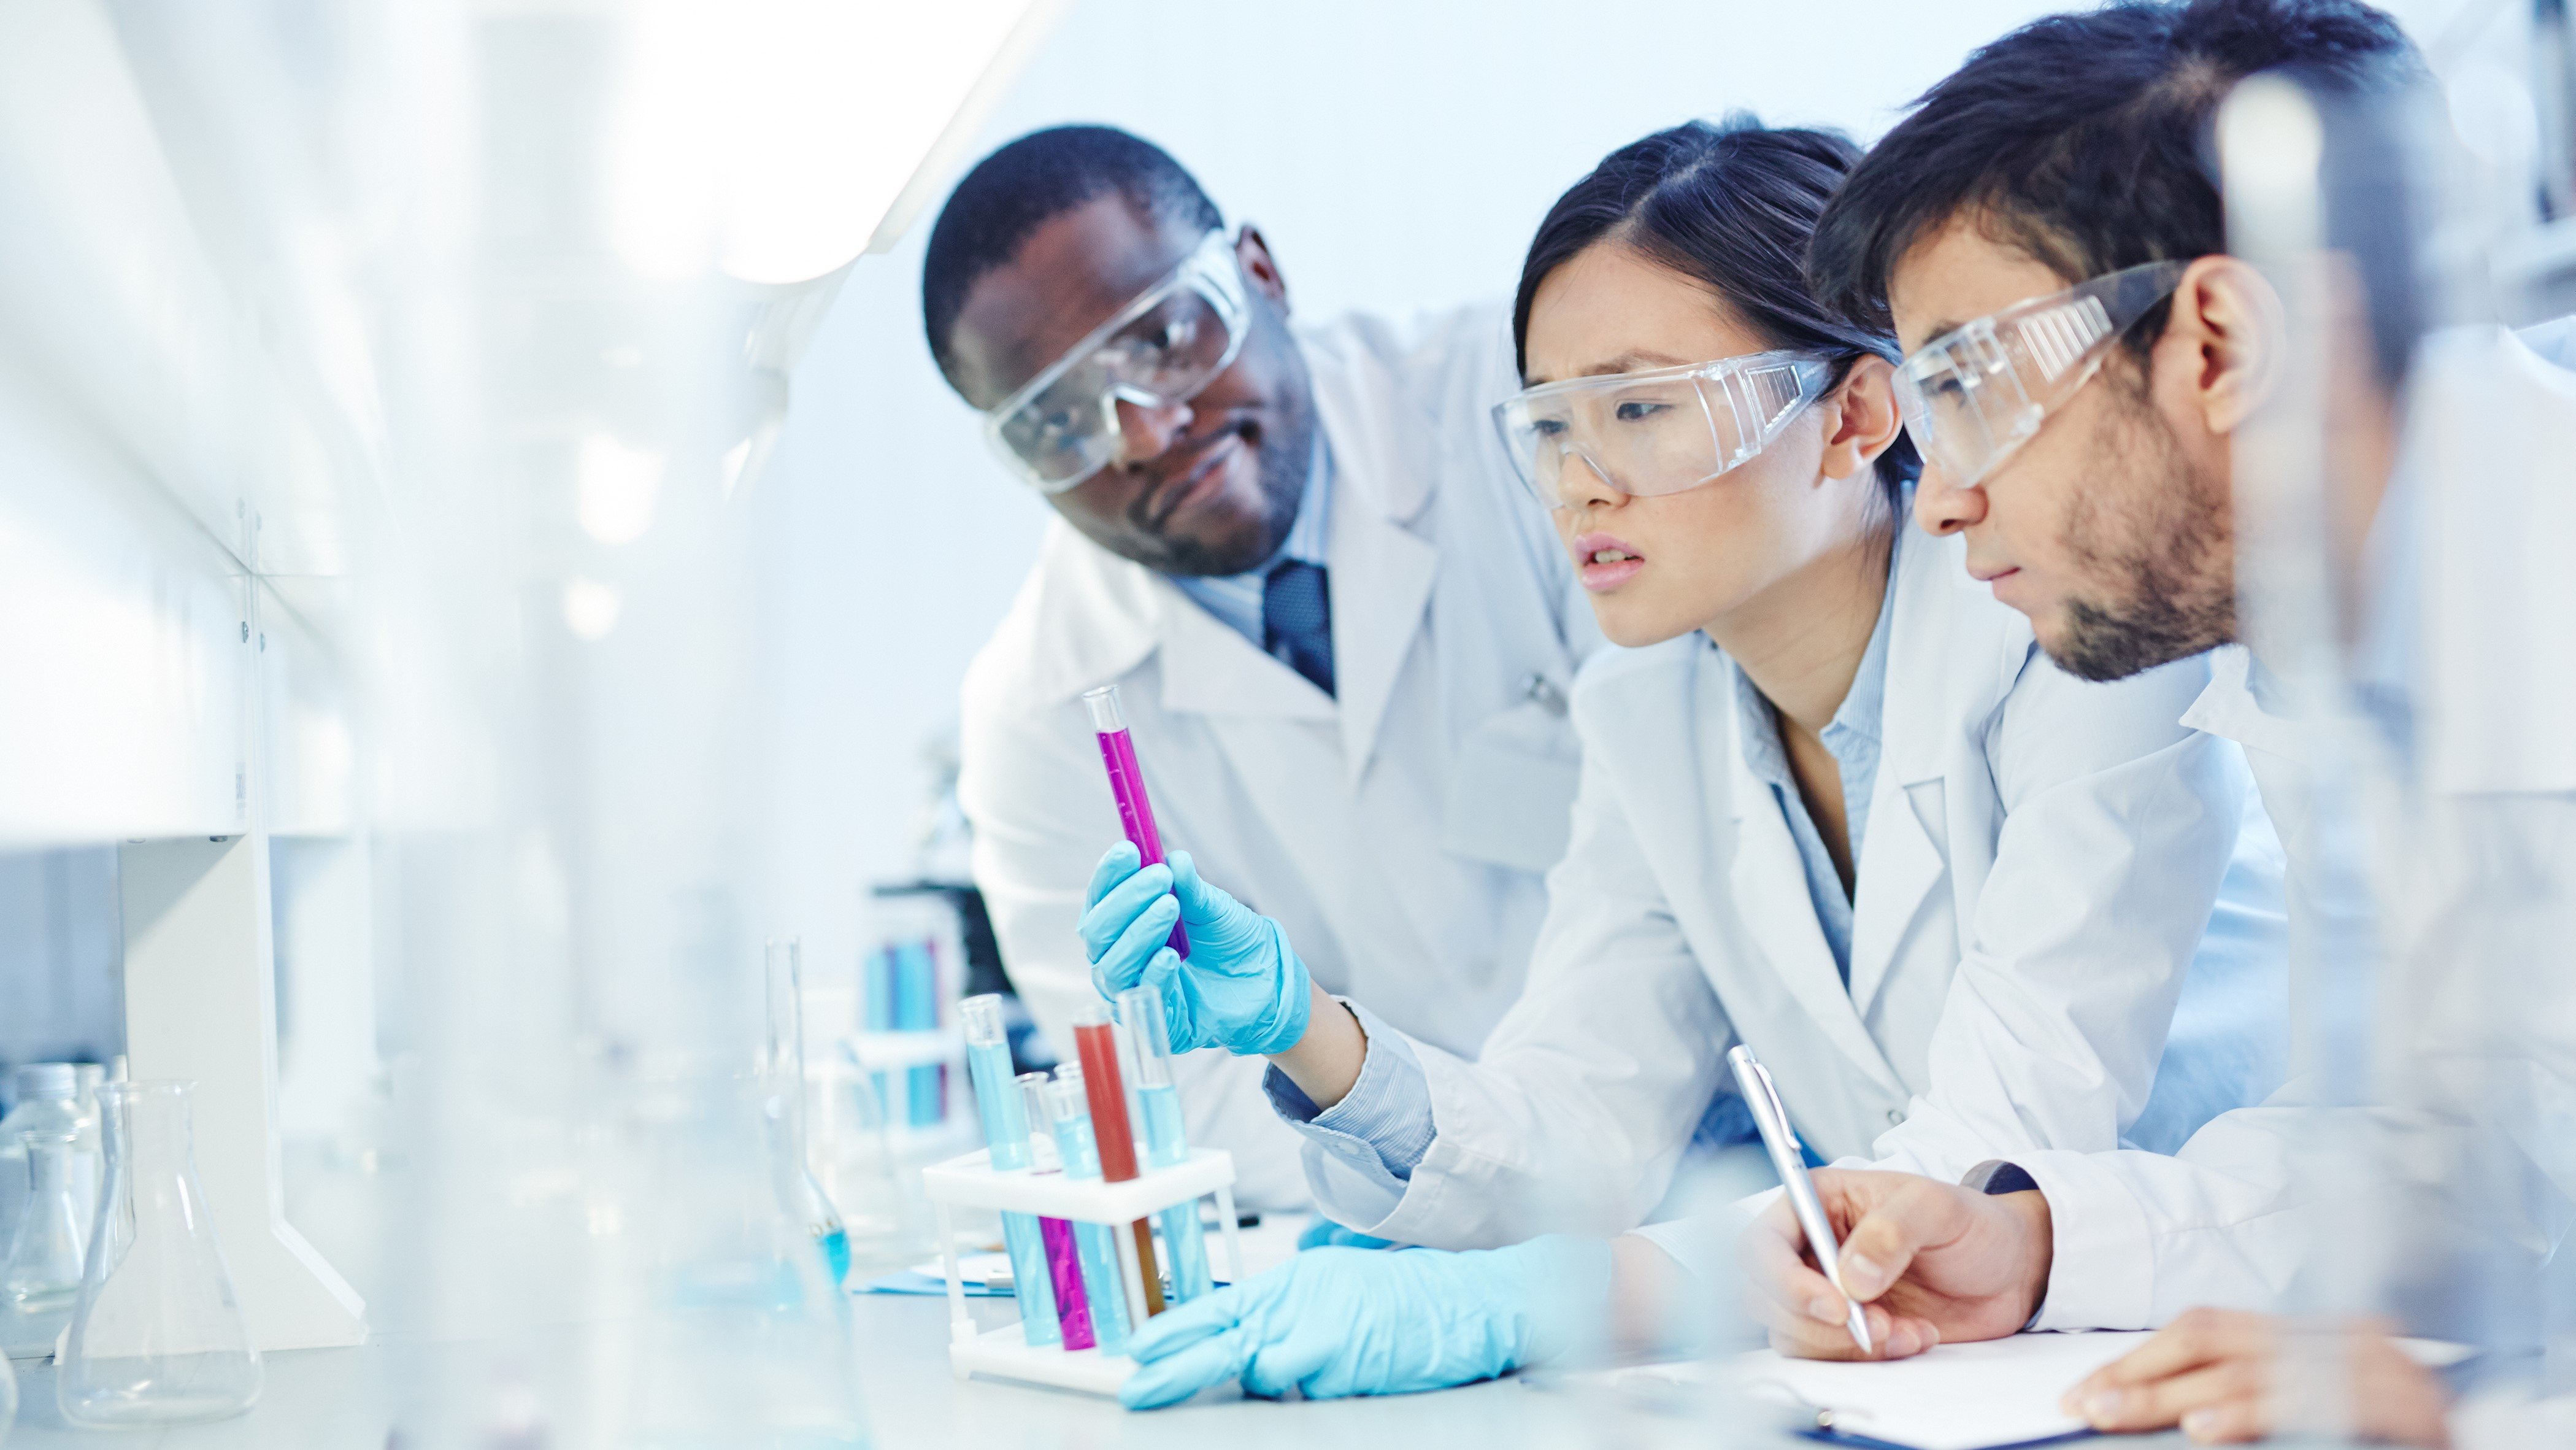 diversity research clinical trials laboratory scientists study lab bench test tube